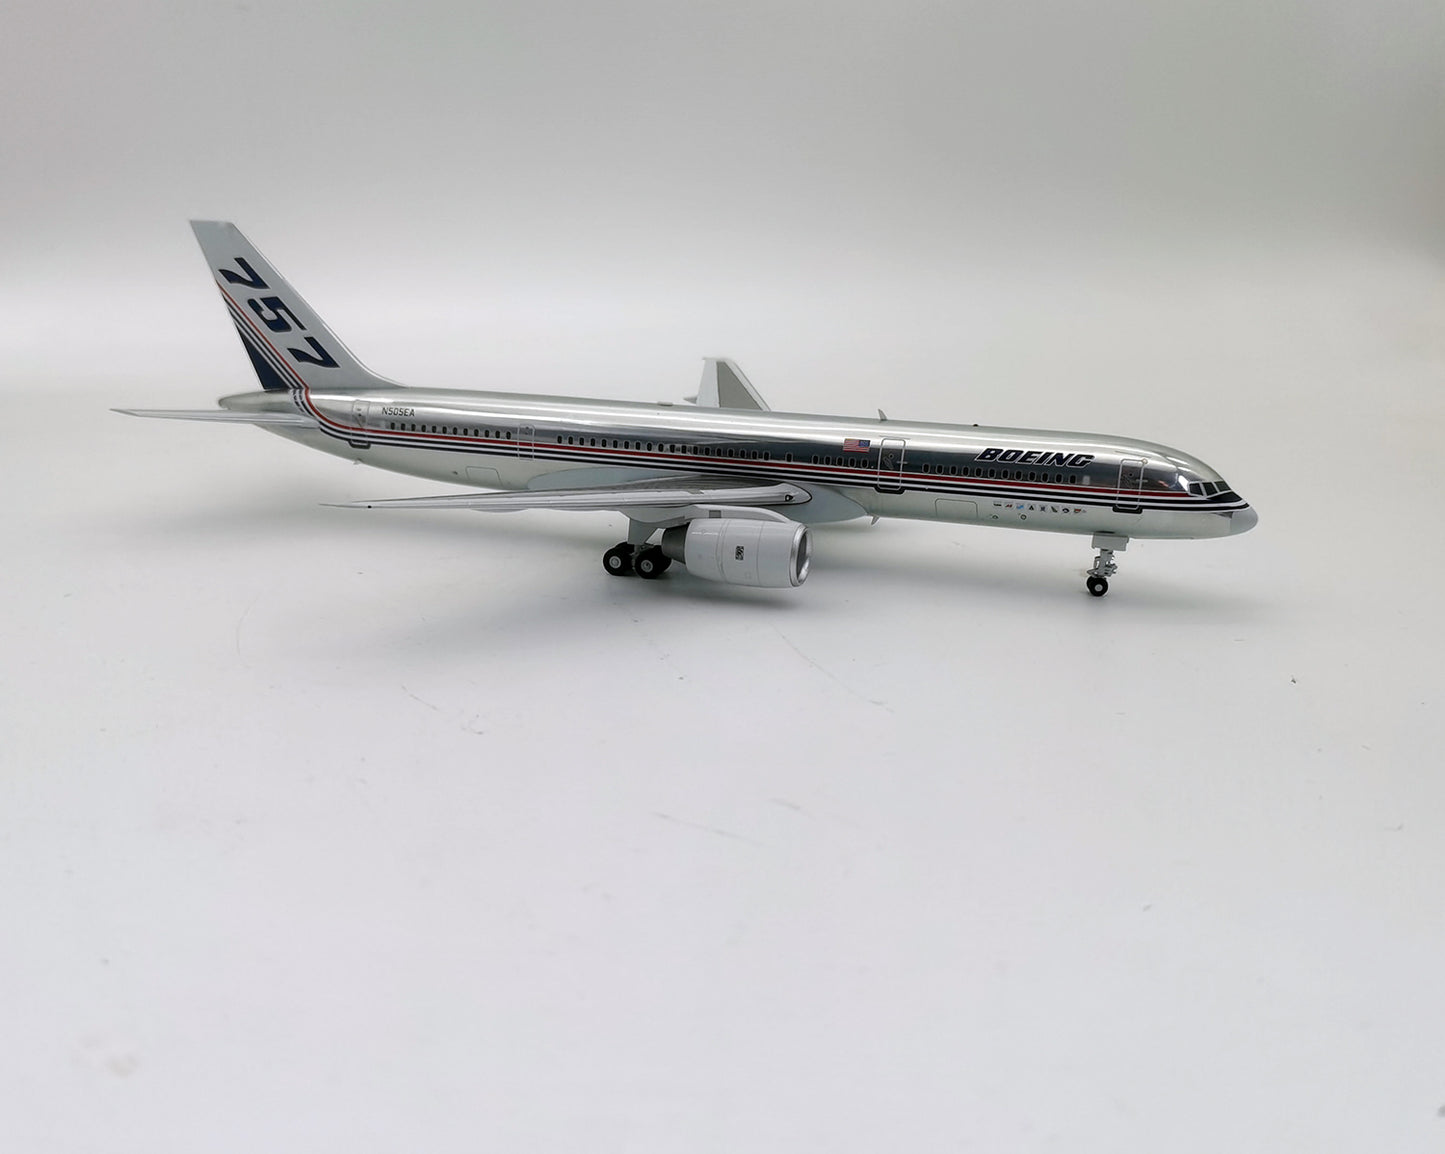 Inflight IF752HOUSE-P 1:200 Boeing House Colors 757-225